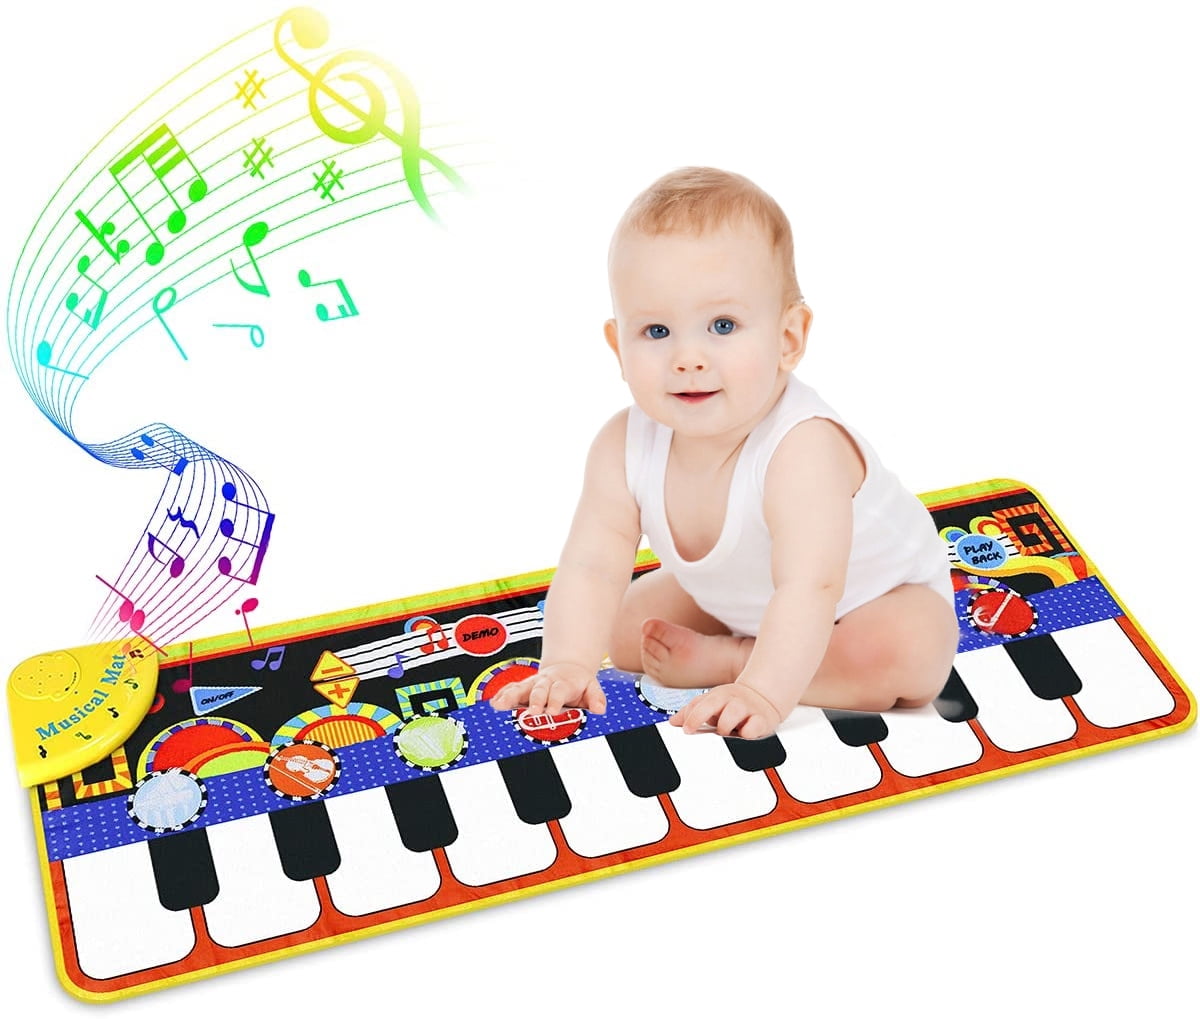 One Fire Kids Piano Mat,Music Dance Blanket with 8 Different Animal Sound,Toddlers Toys Musical Keyboard Electronic Playmat,Educational Learning Baby Toys for 1 2 3 4 5 6 7 8 Year Old Boys Girls Gifts 